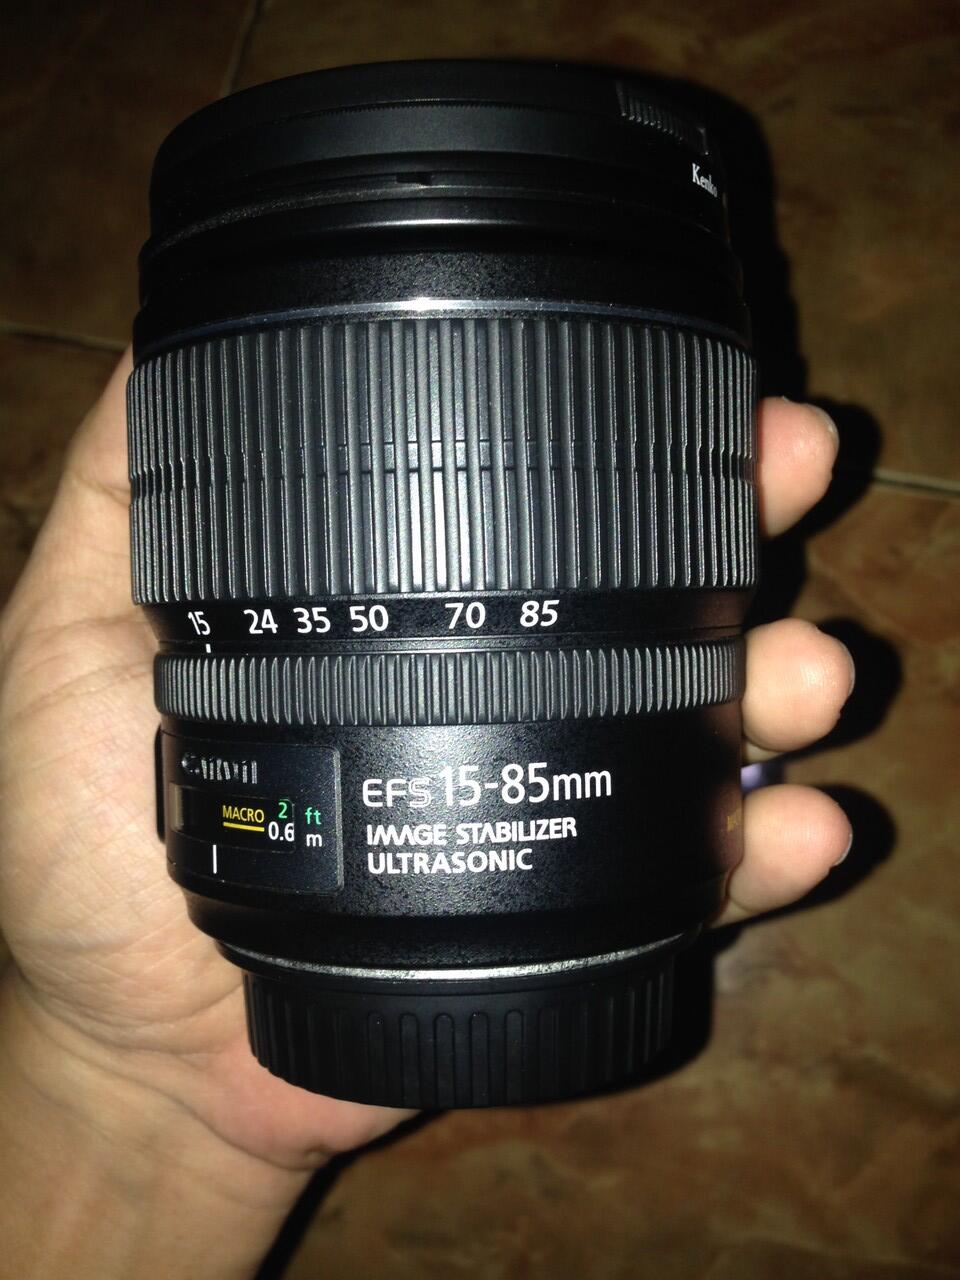 Canon efs 15-85 mm